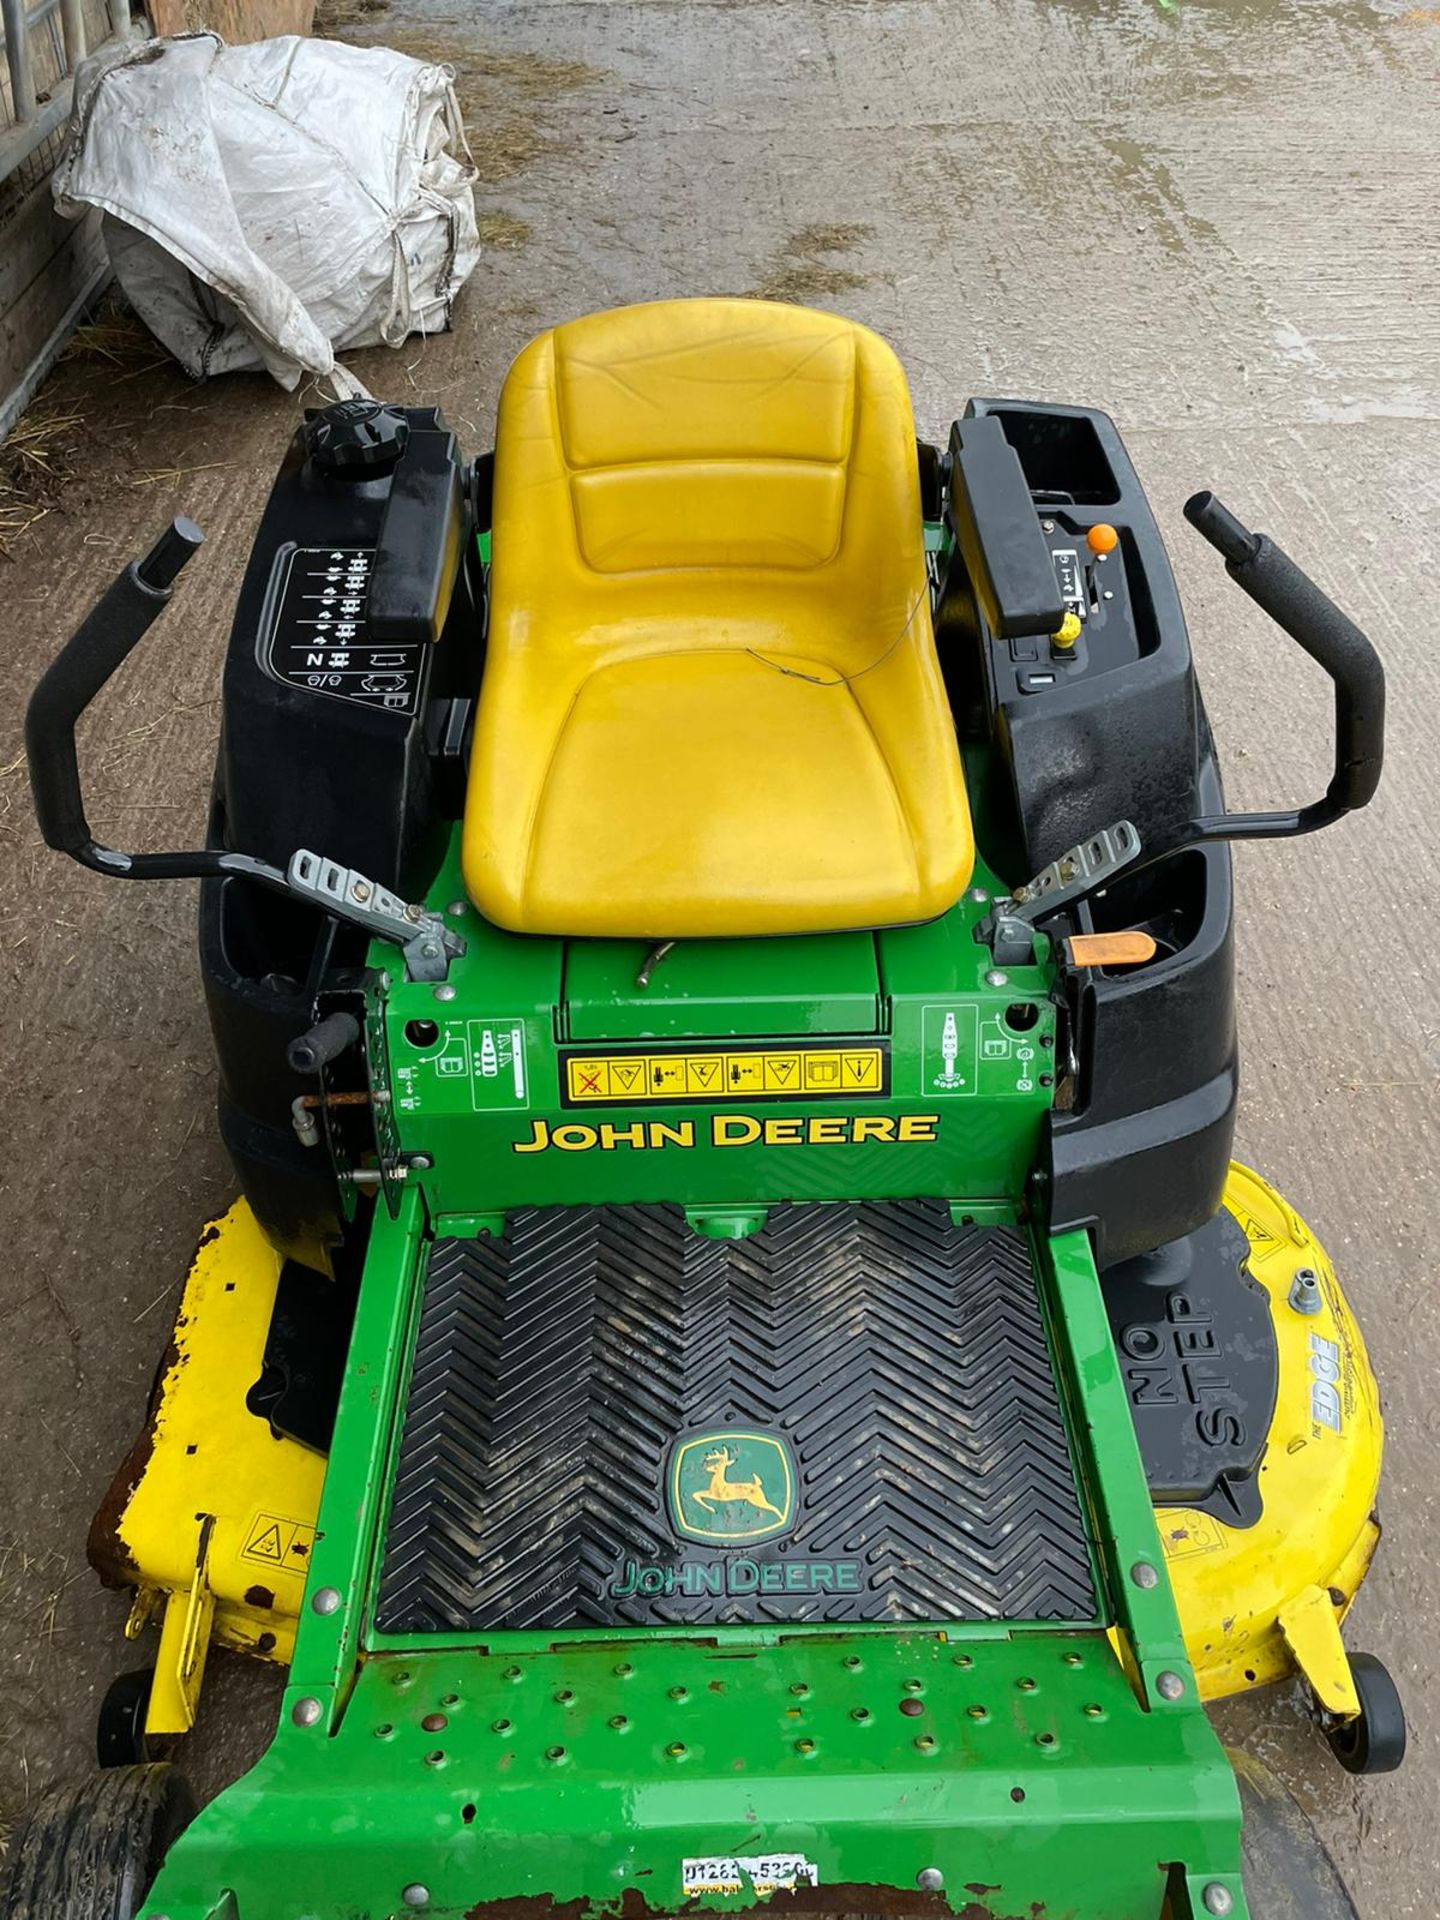 2014 JOHN DEERE Z435 ZERO TURN MOWER, SOLD NEW IN 2015, RUNS, DRIVES AND CUTS, GOOD CONDITION - Image 6 of 8